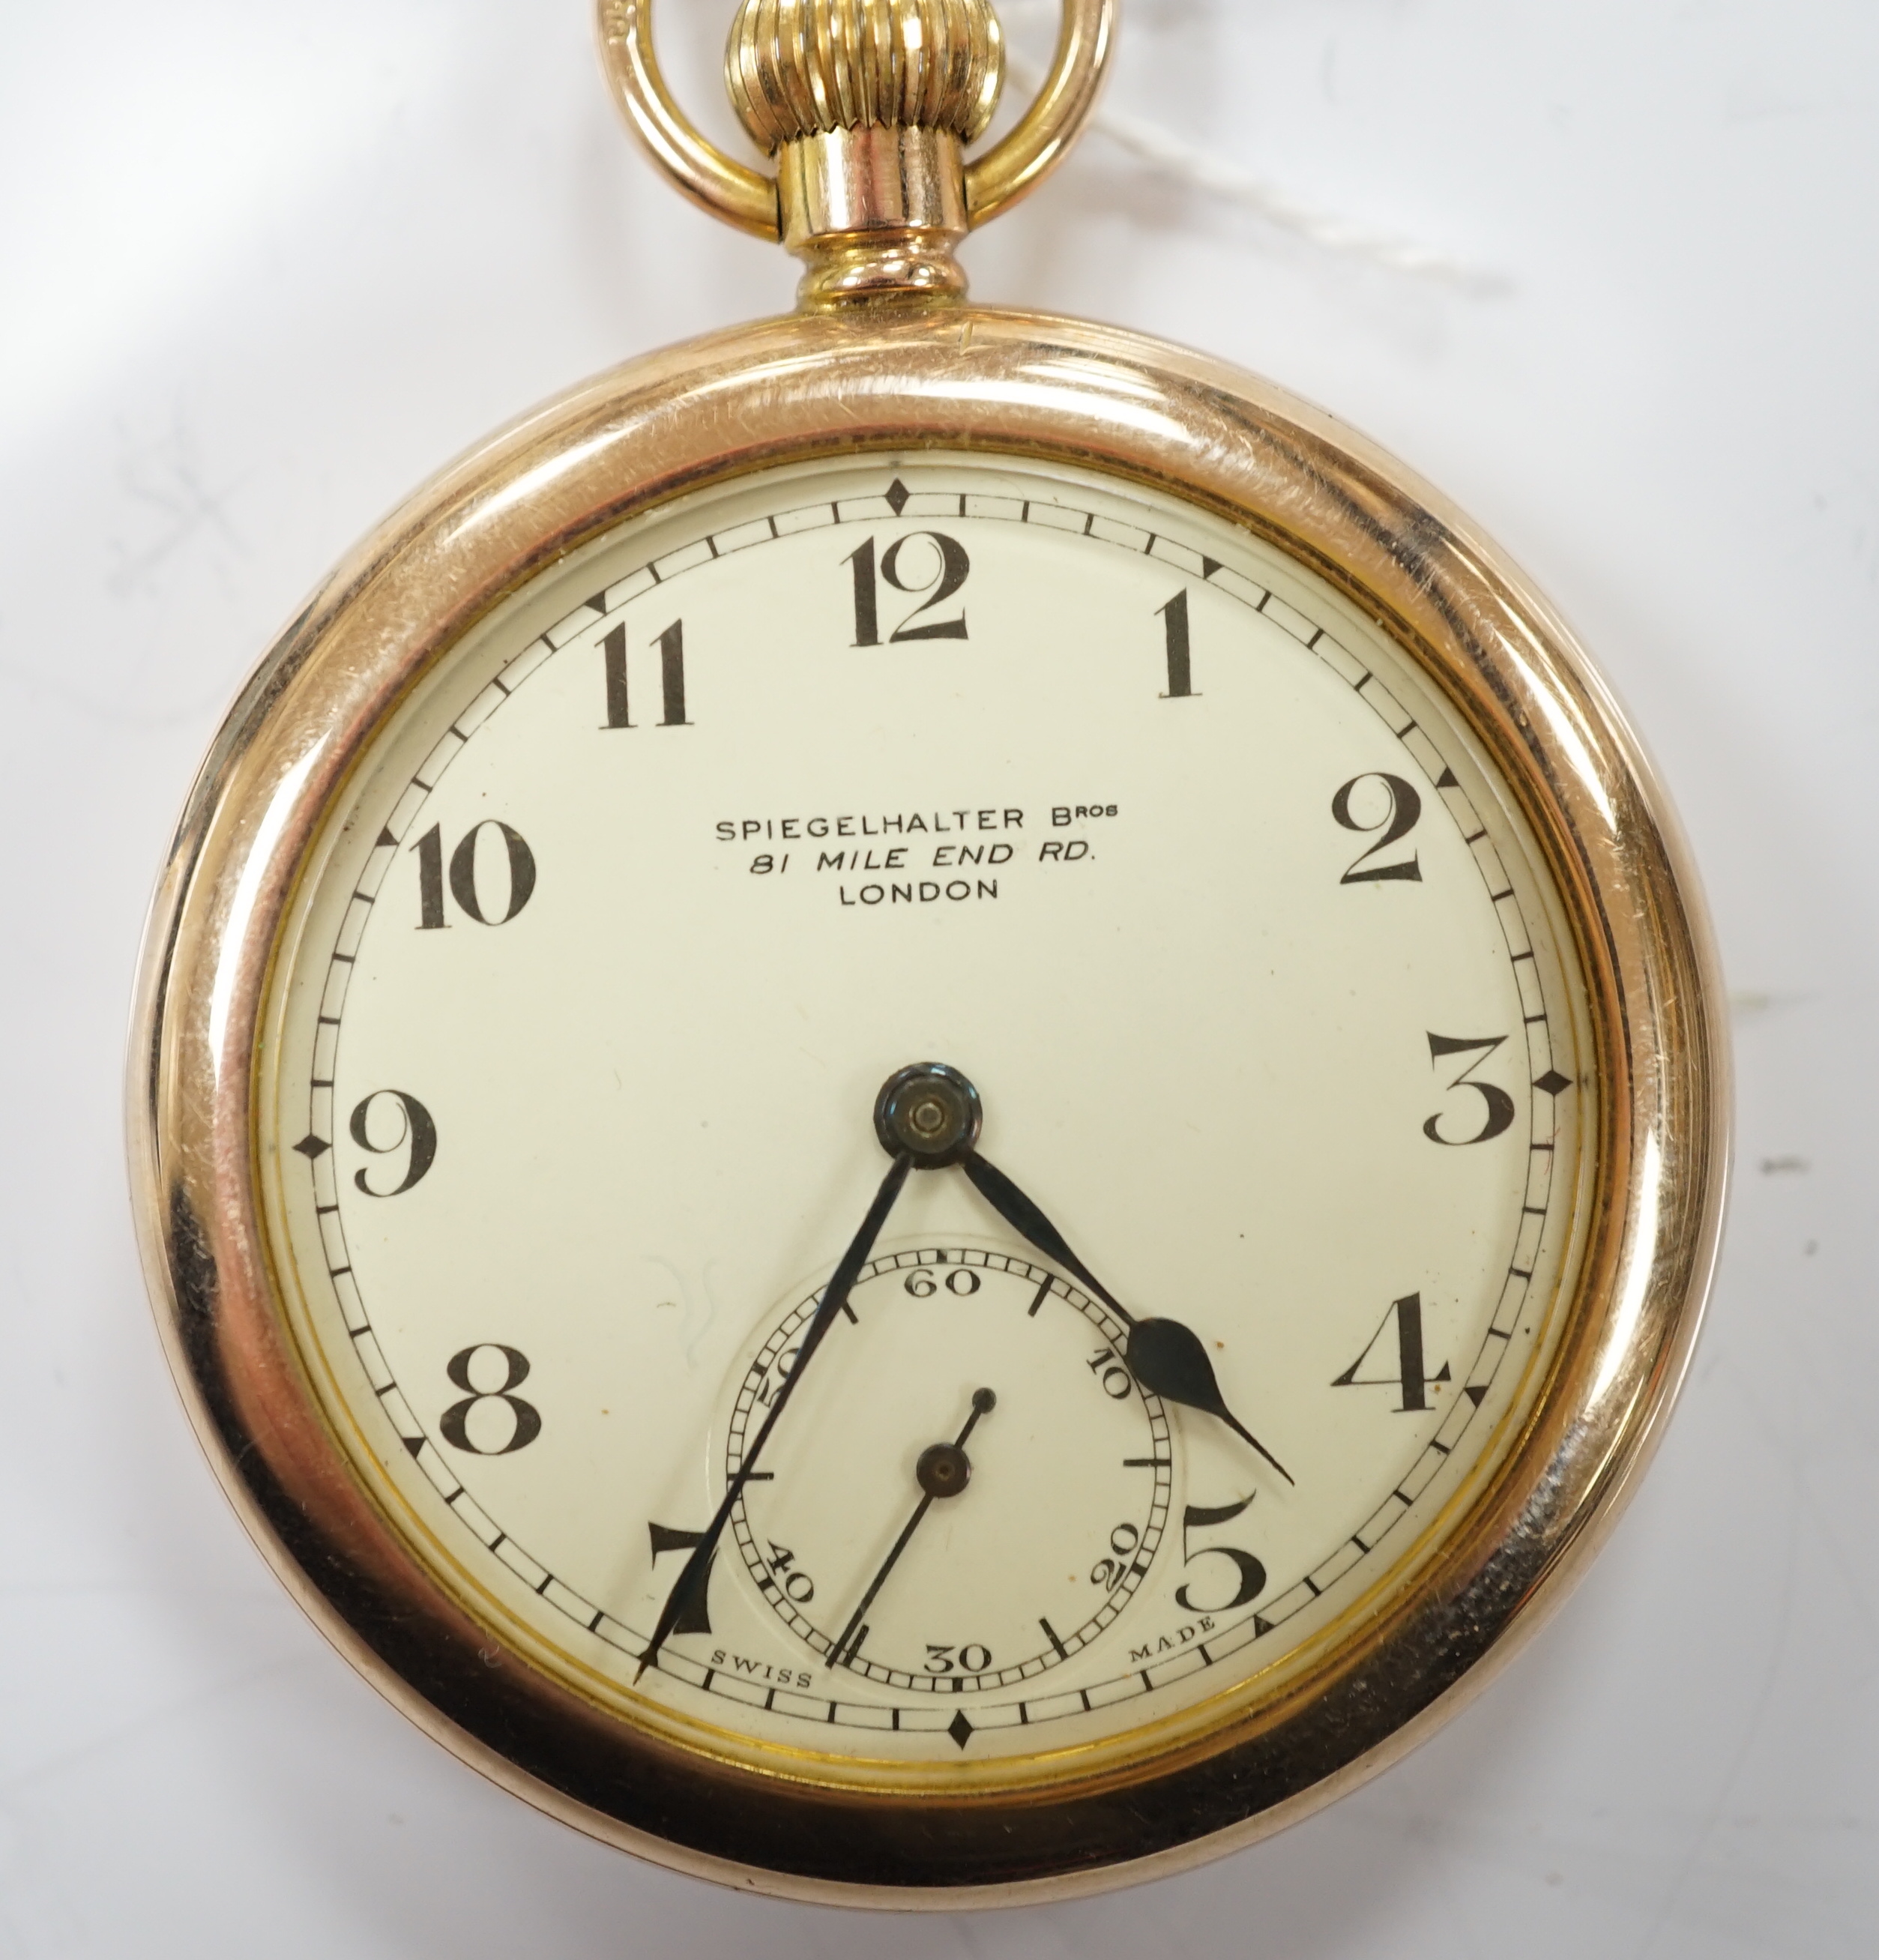 An early 20th century 9ct gold open face pocket watch, retailed by Spiegelhalter Bros, with Arabic dial and subsidiary seconds, case diameter 47mm, gross weight 61.2 grams.